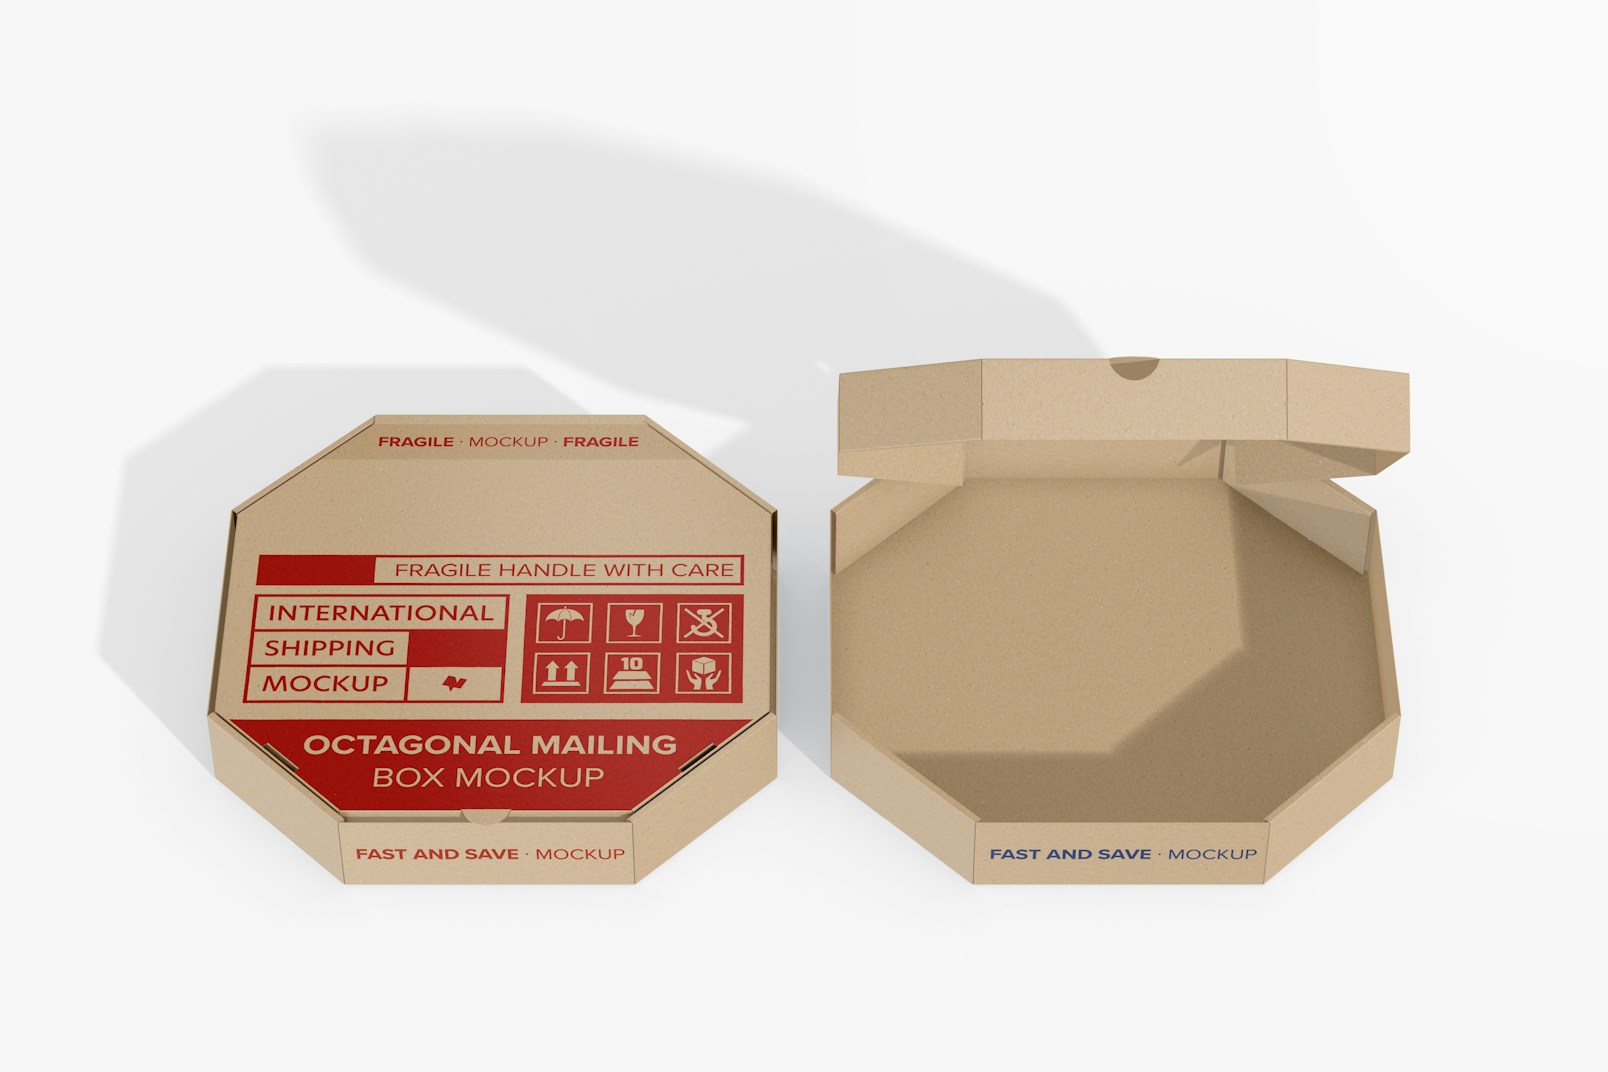 Octagonal Mailing Boxes Mockup, Opened and Closed